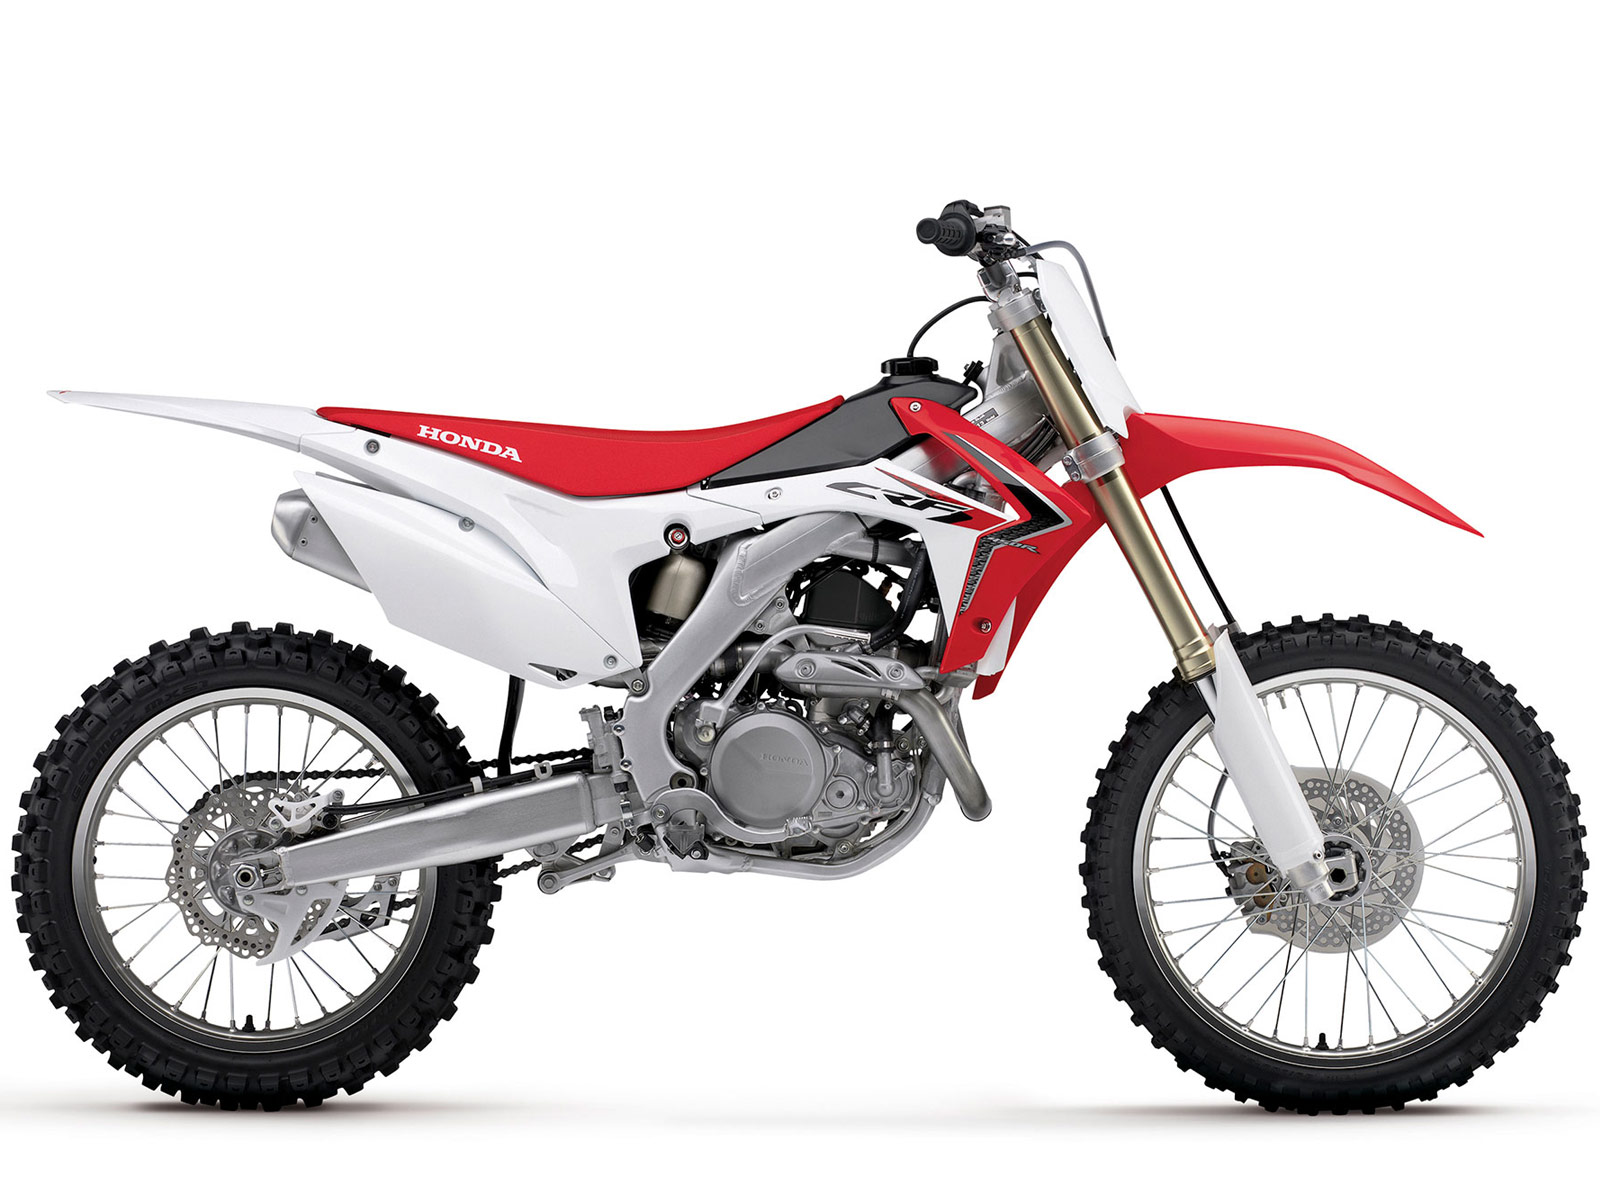  GAMBAR  MOTOR  2014 Honda CRF450R specifications pictures 